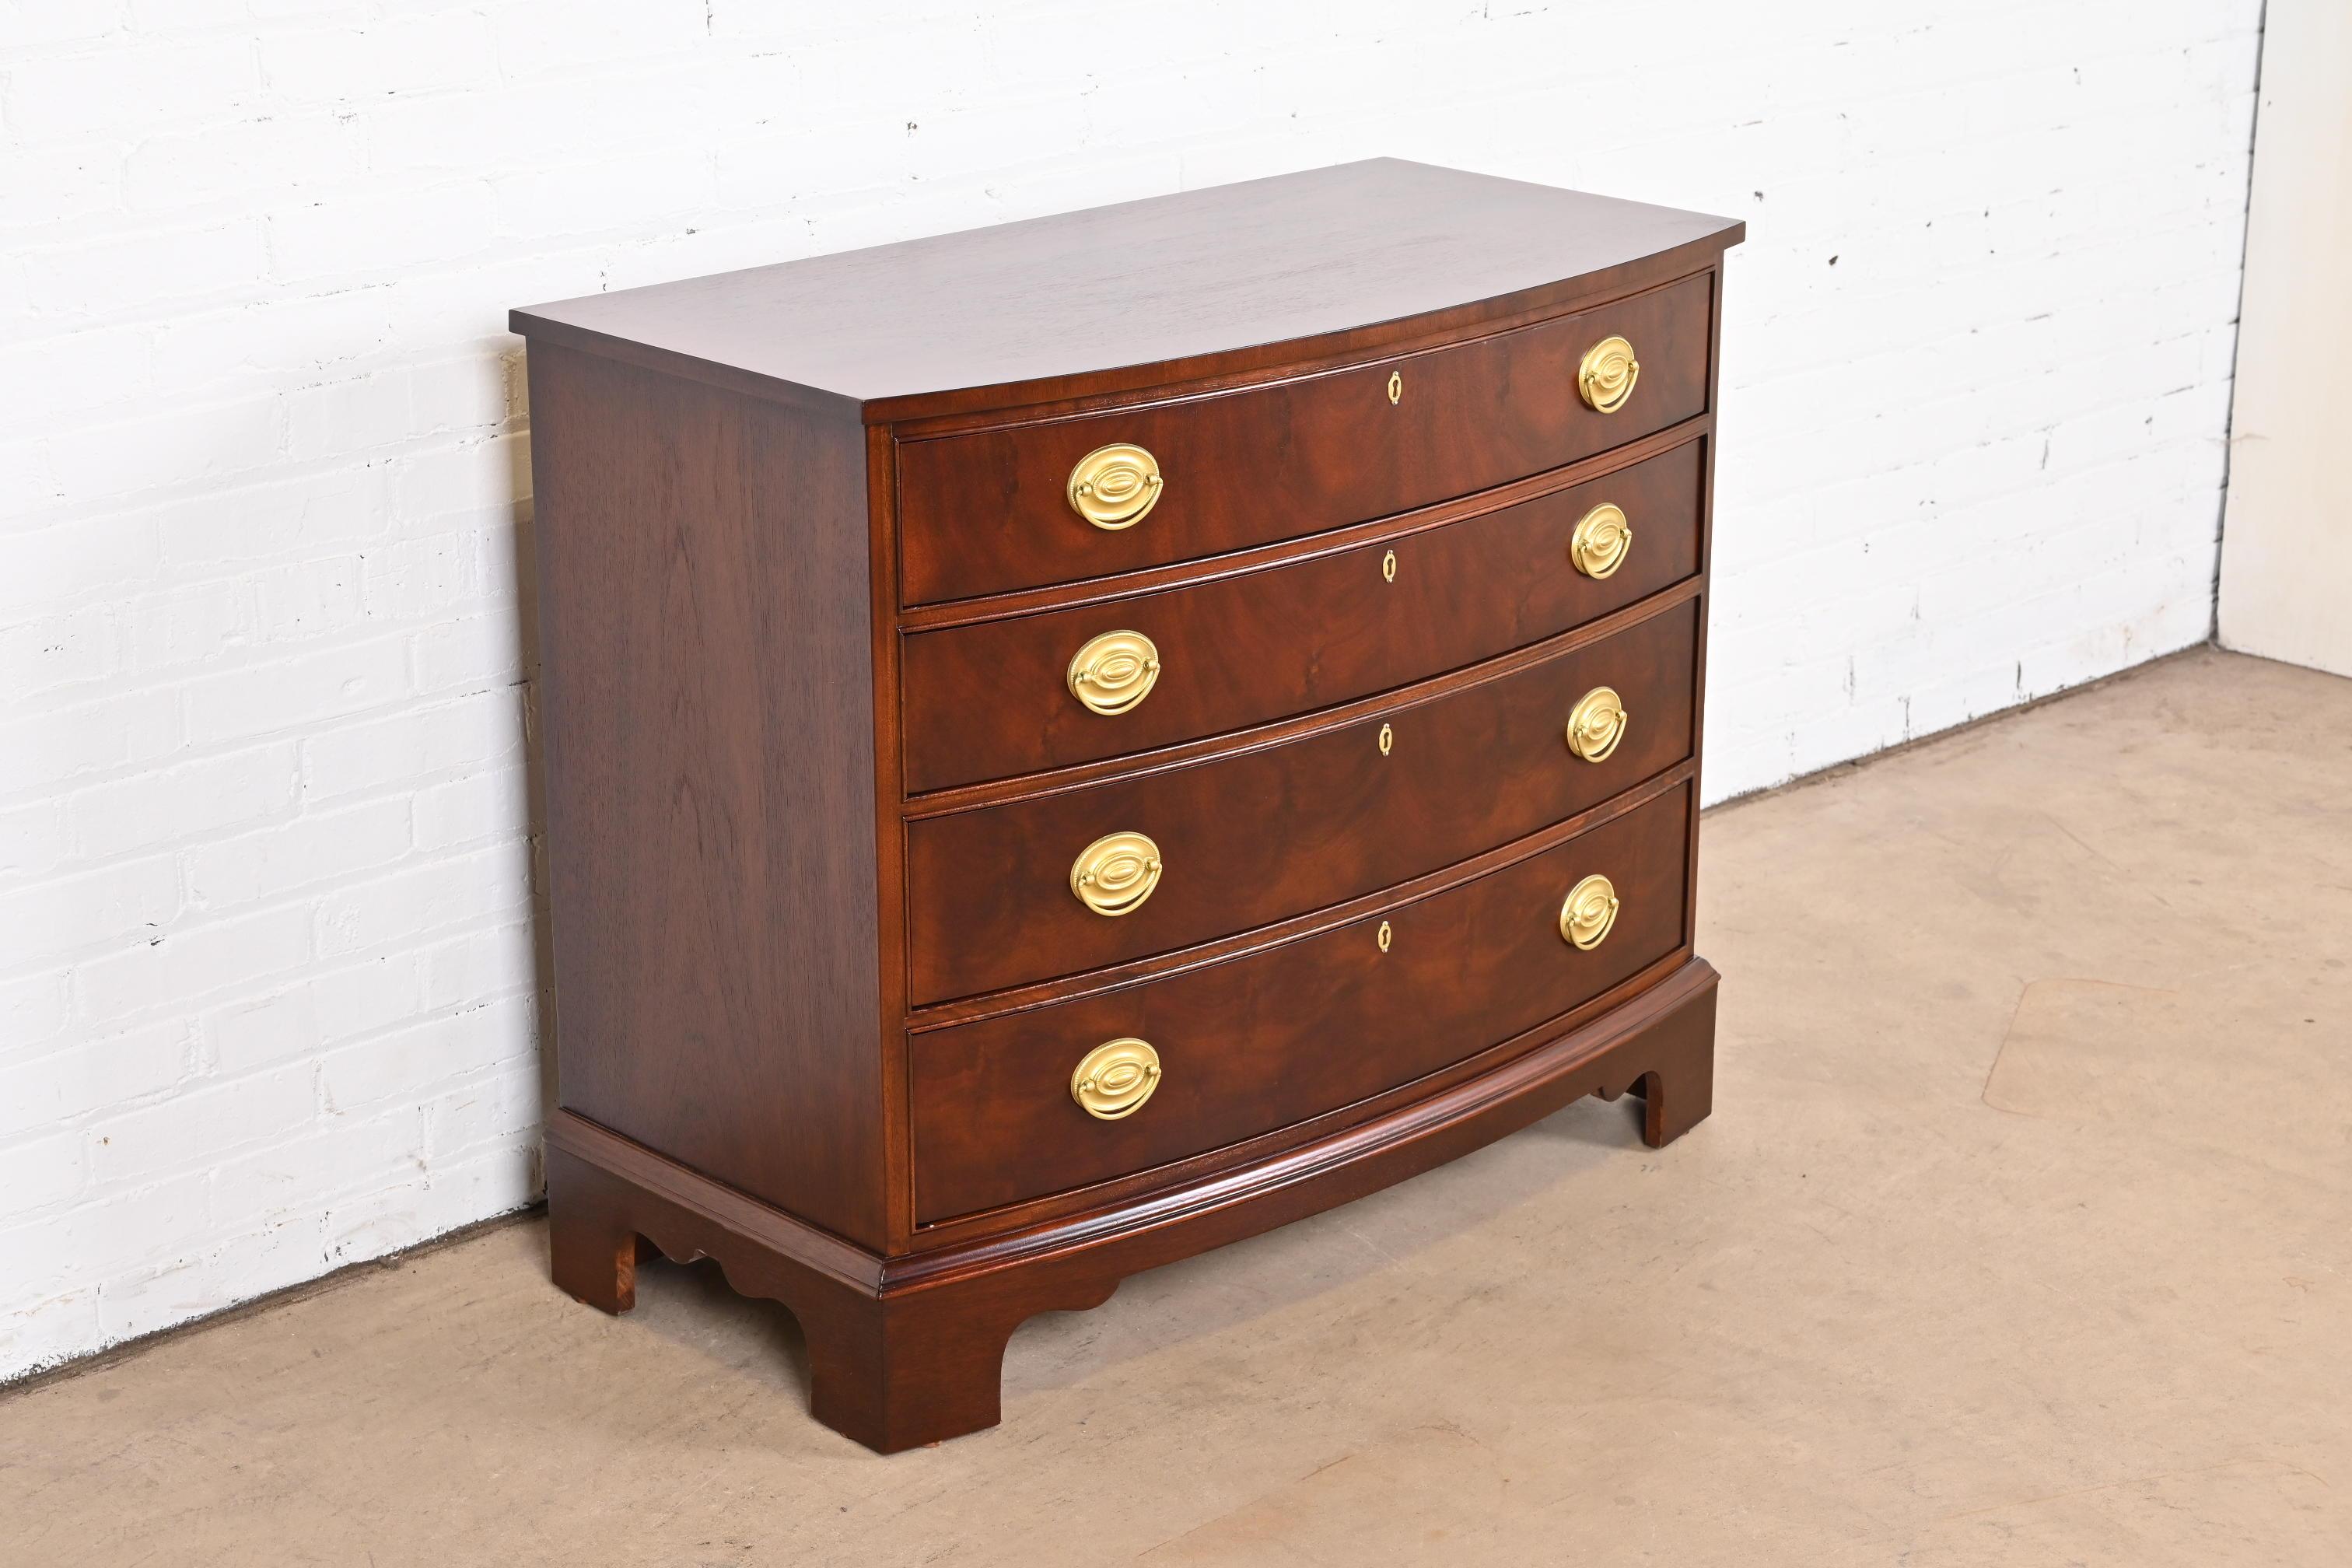 20th Century Ethan Allen Georgian Flame Mahogany Bow Front Chest of Drawers, Newly Refinished